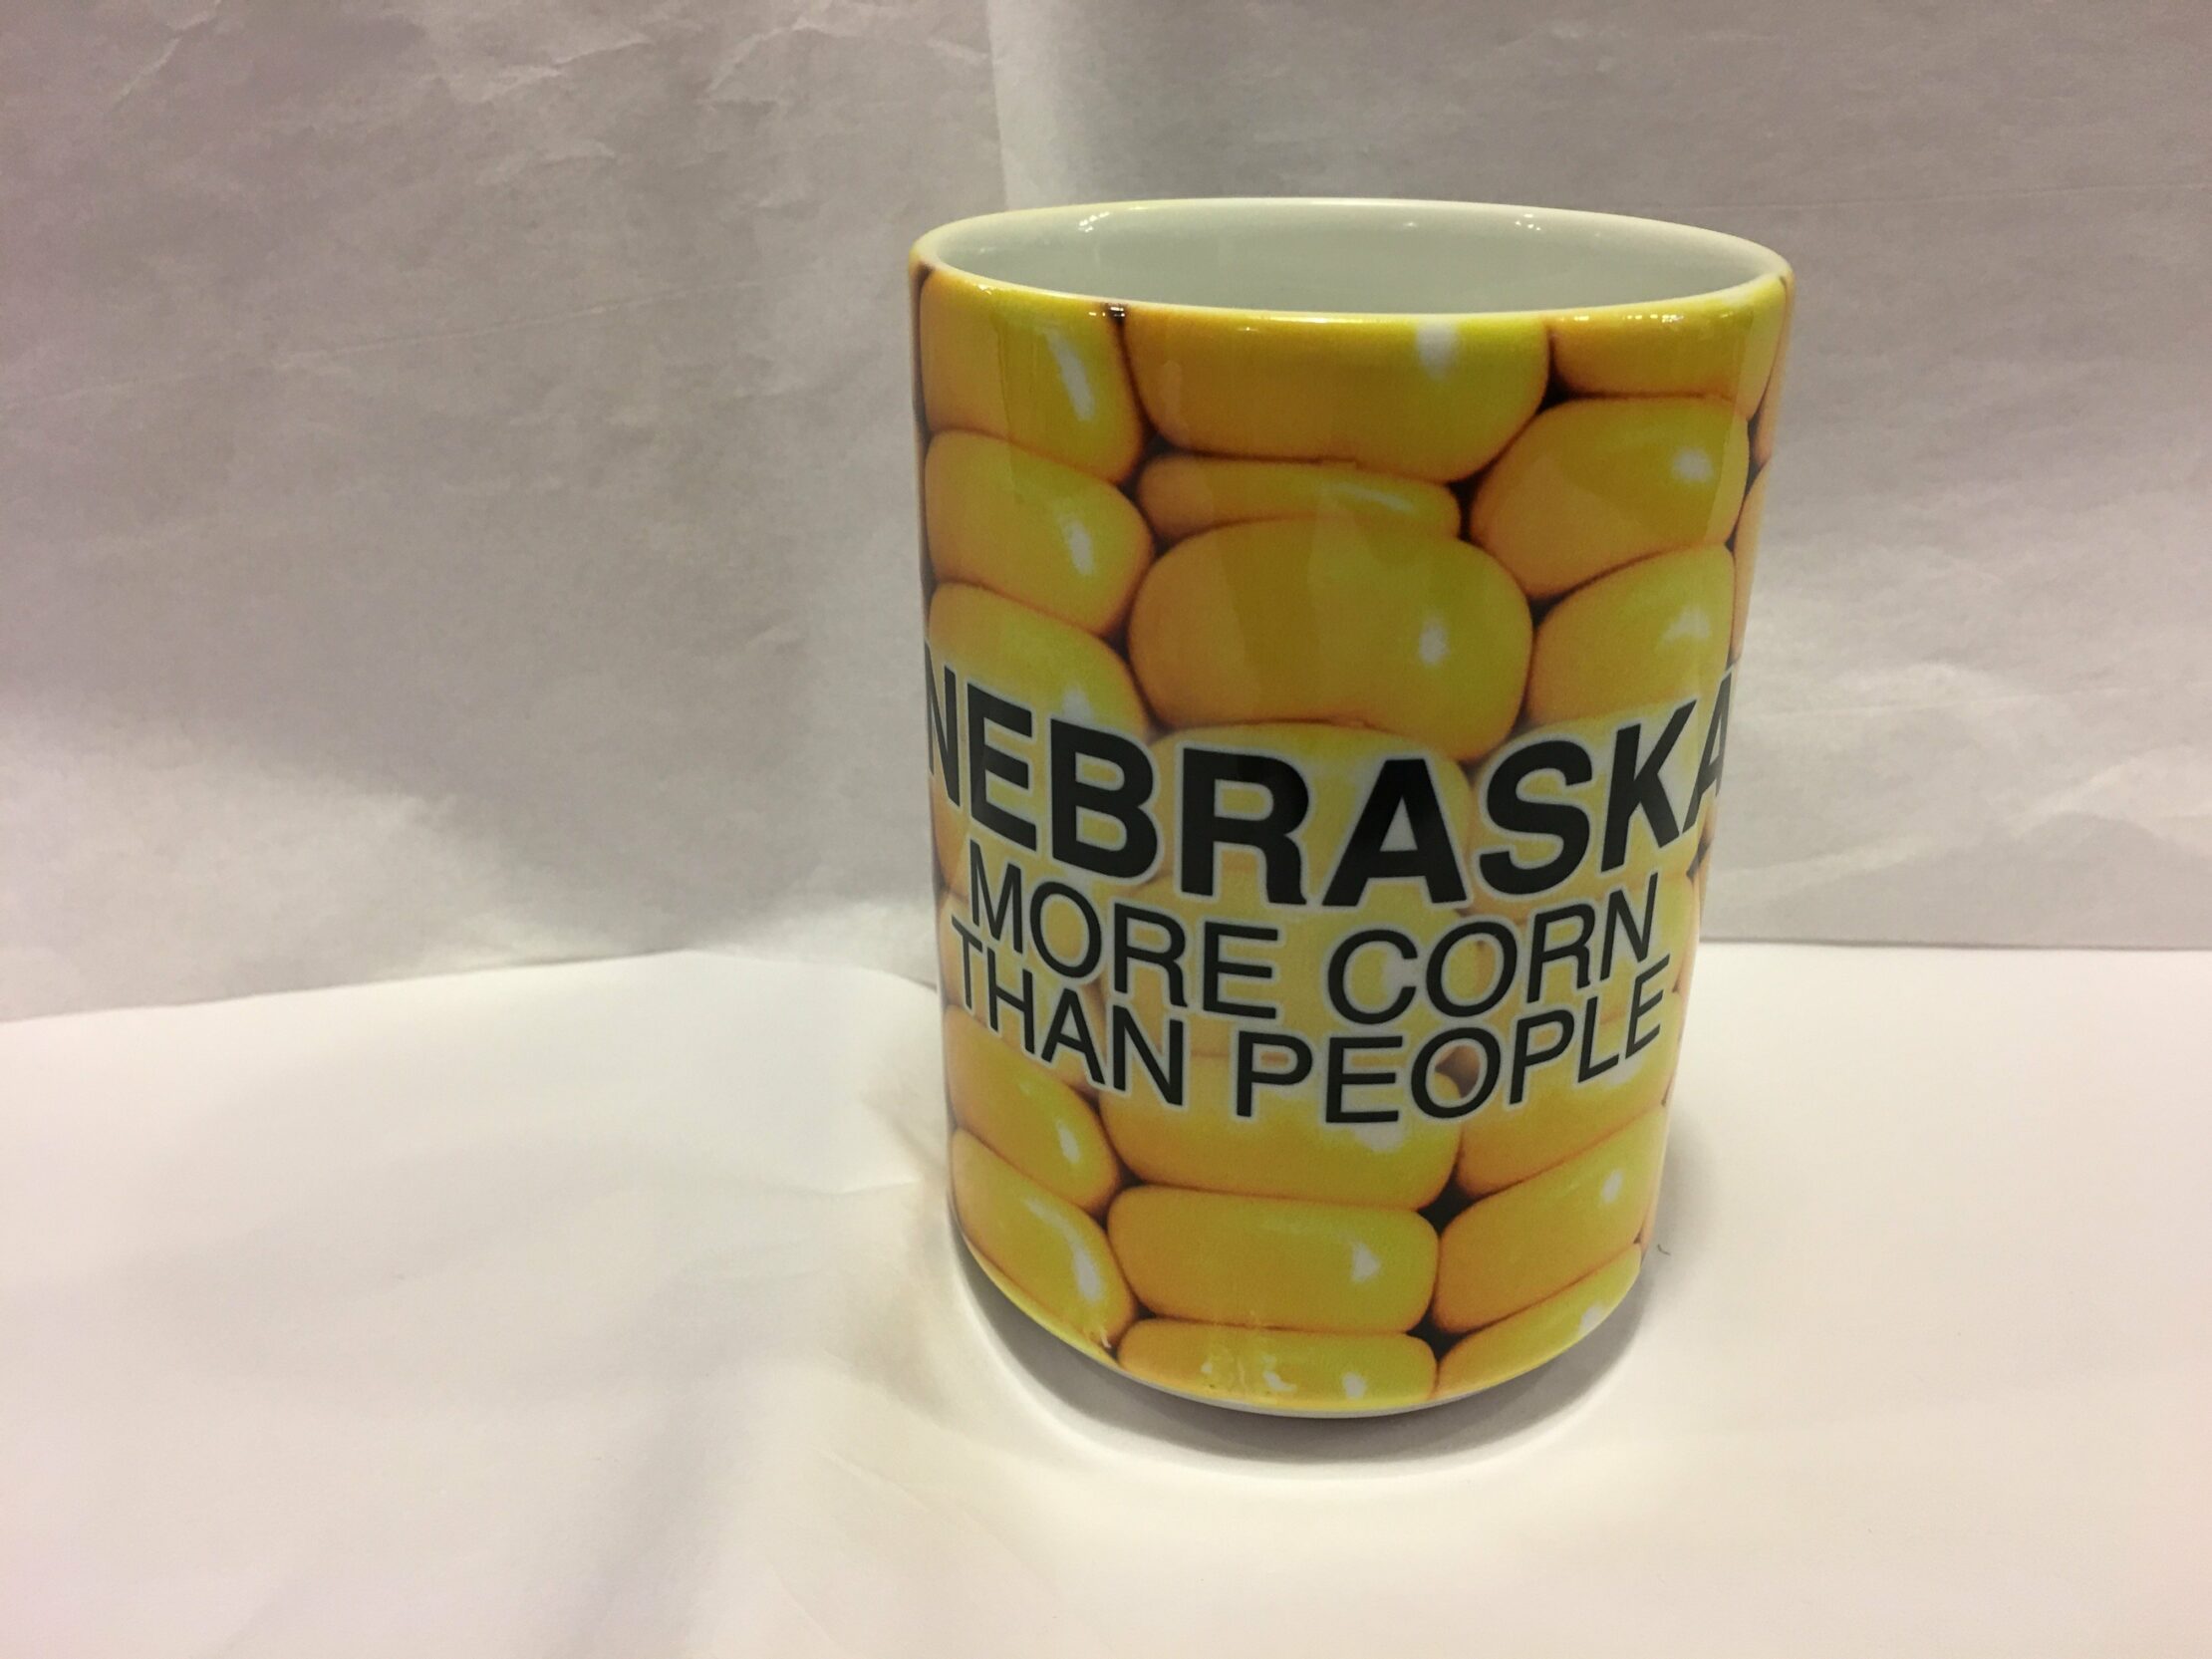 https://fromne.com/wp-content/uploads/2021/07/more_corn_than_people_mug-scaled.jpg